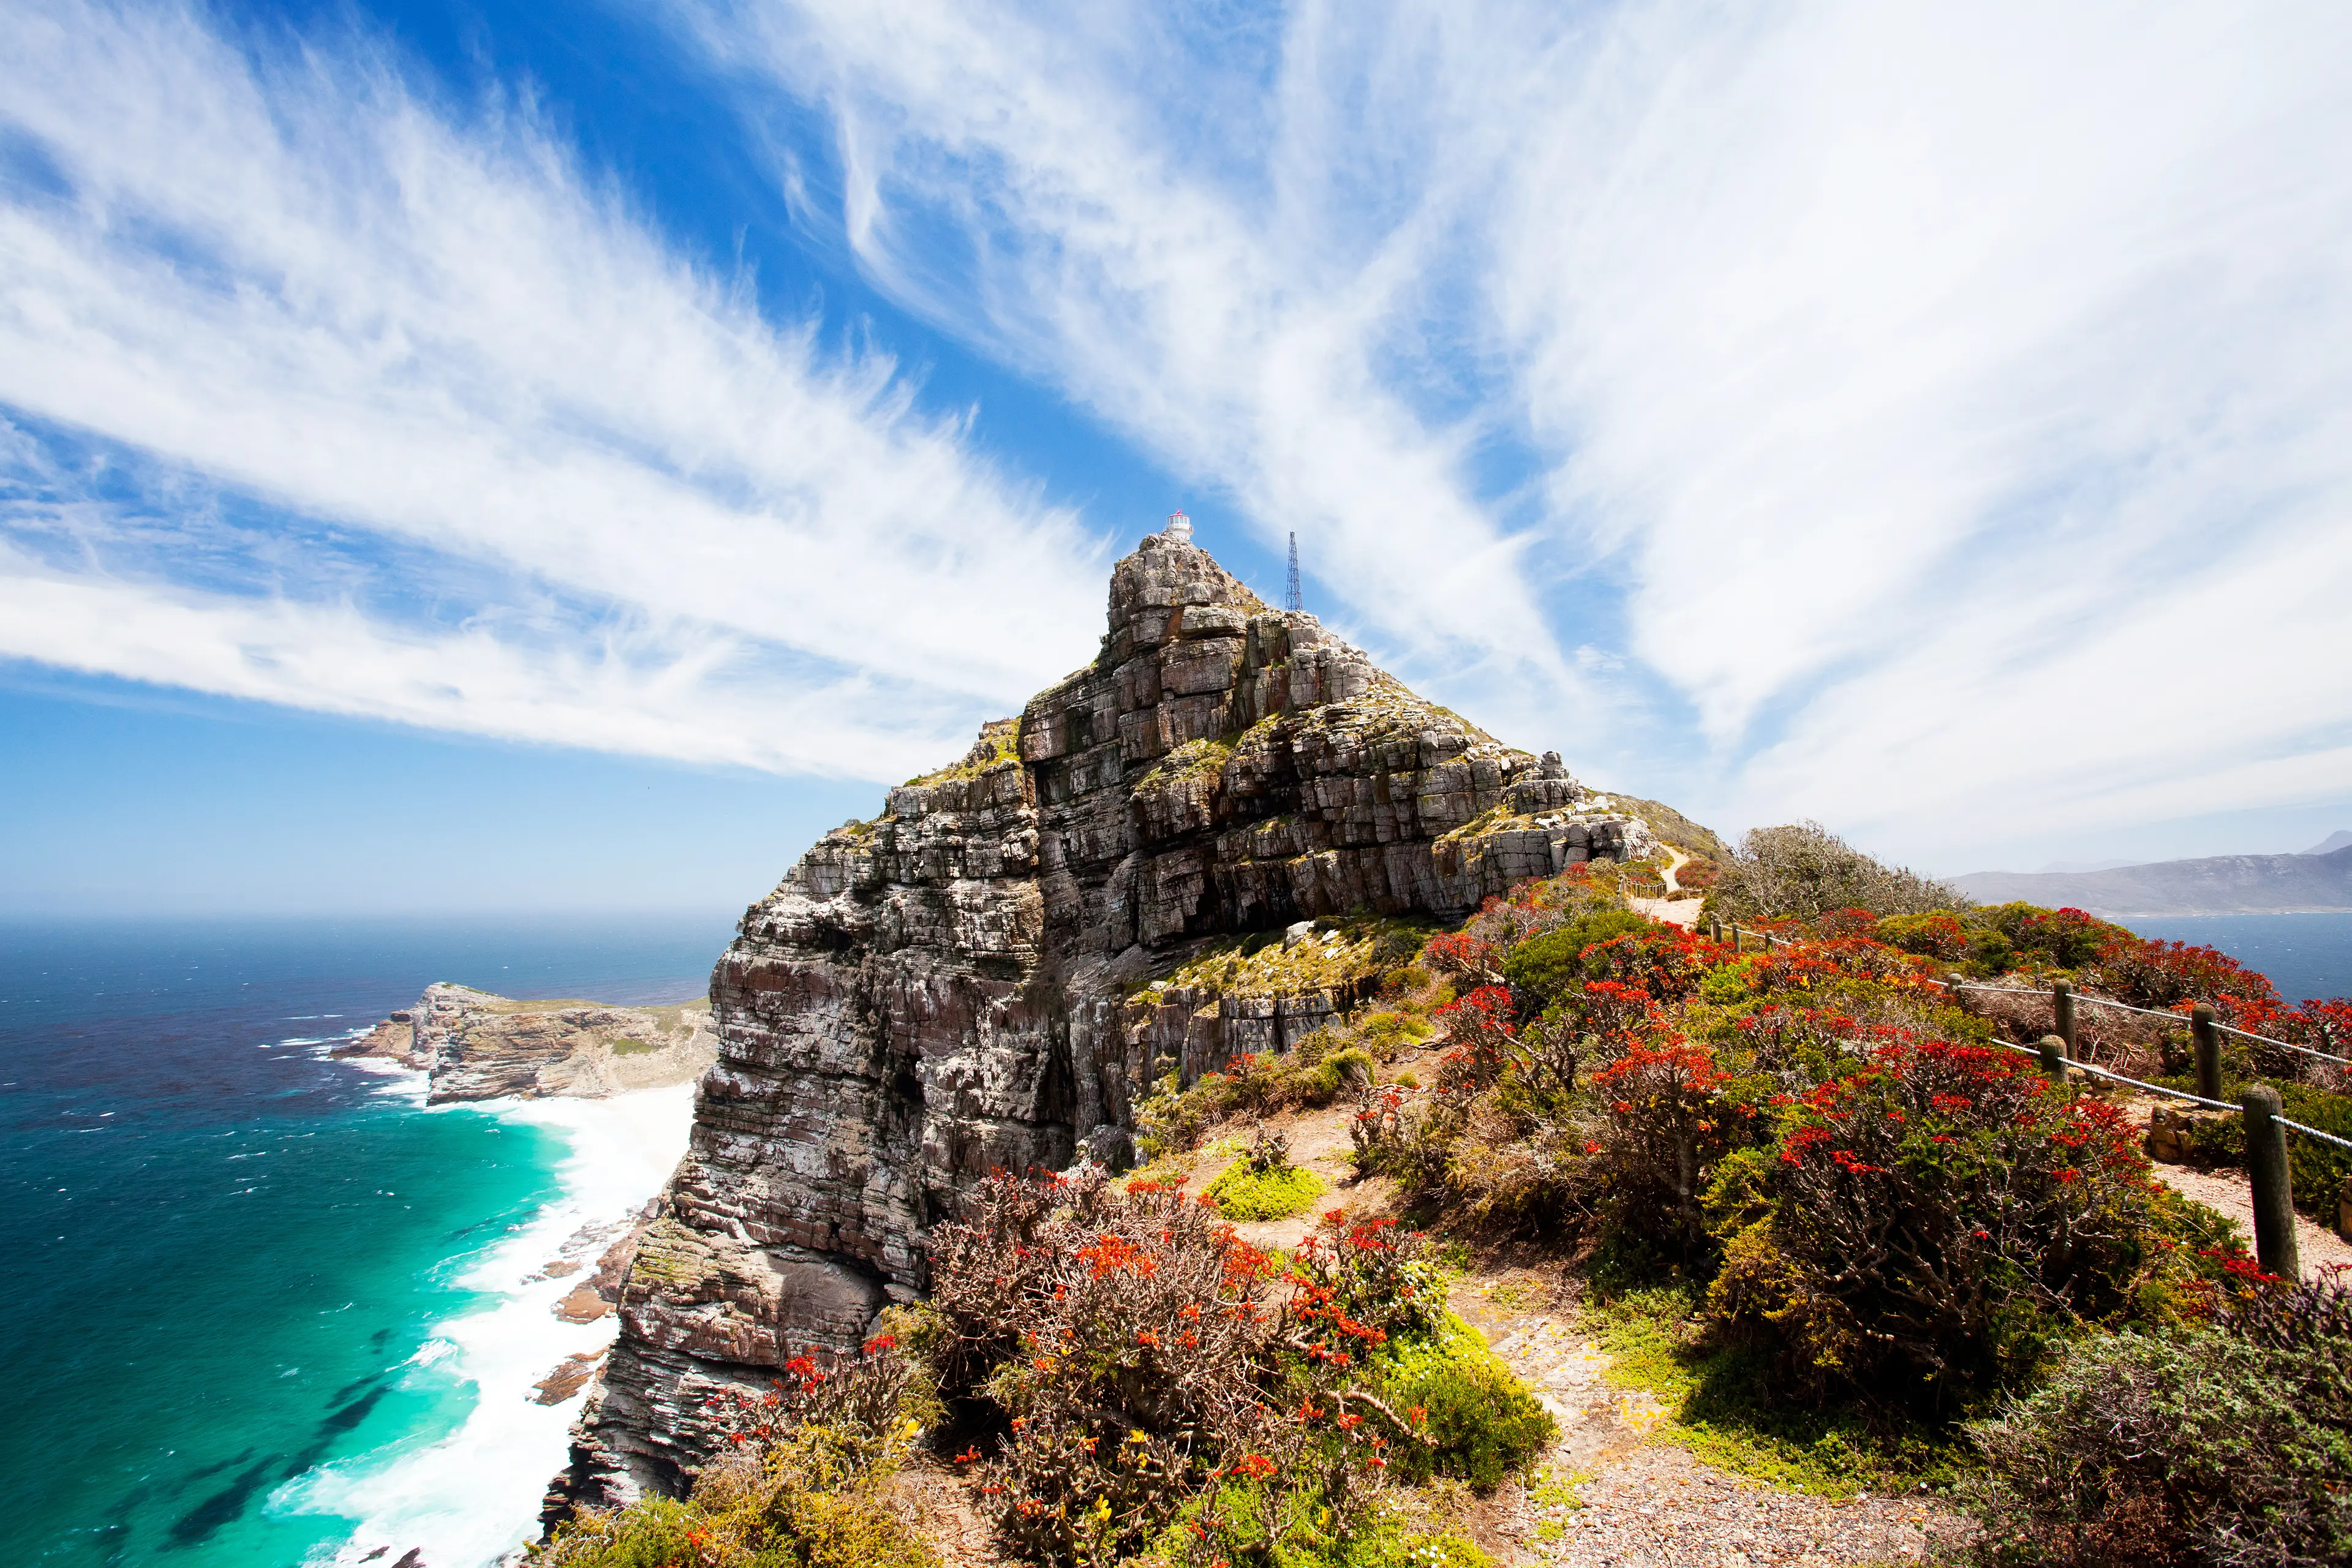 4-Day Local Adventure & Nightlife with Friends in Cape Town